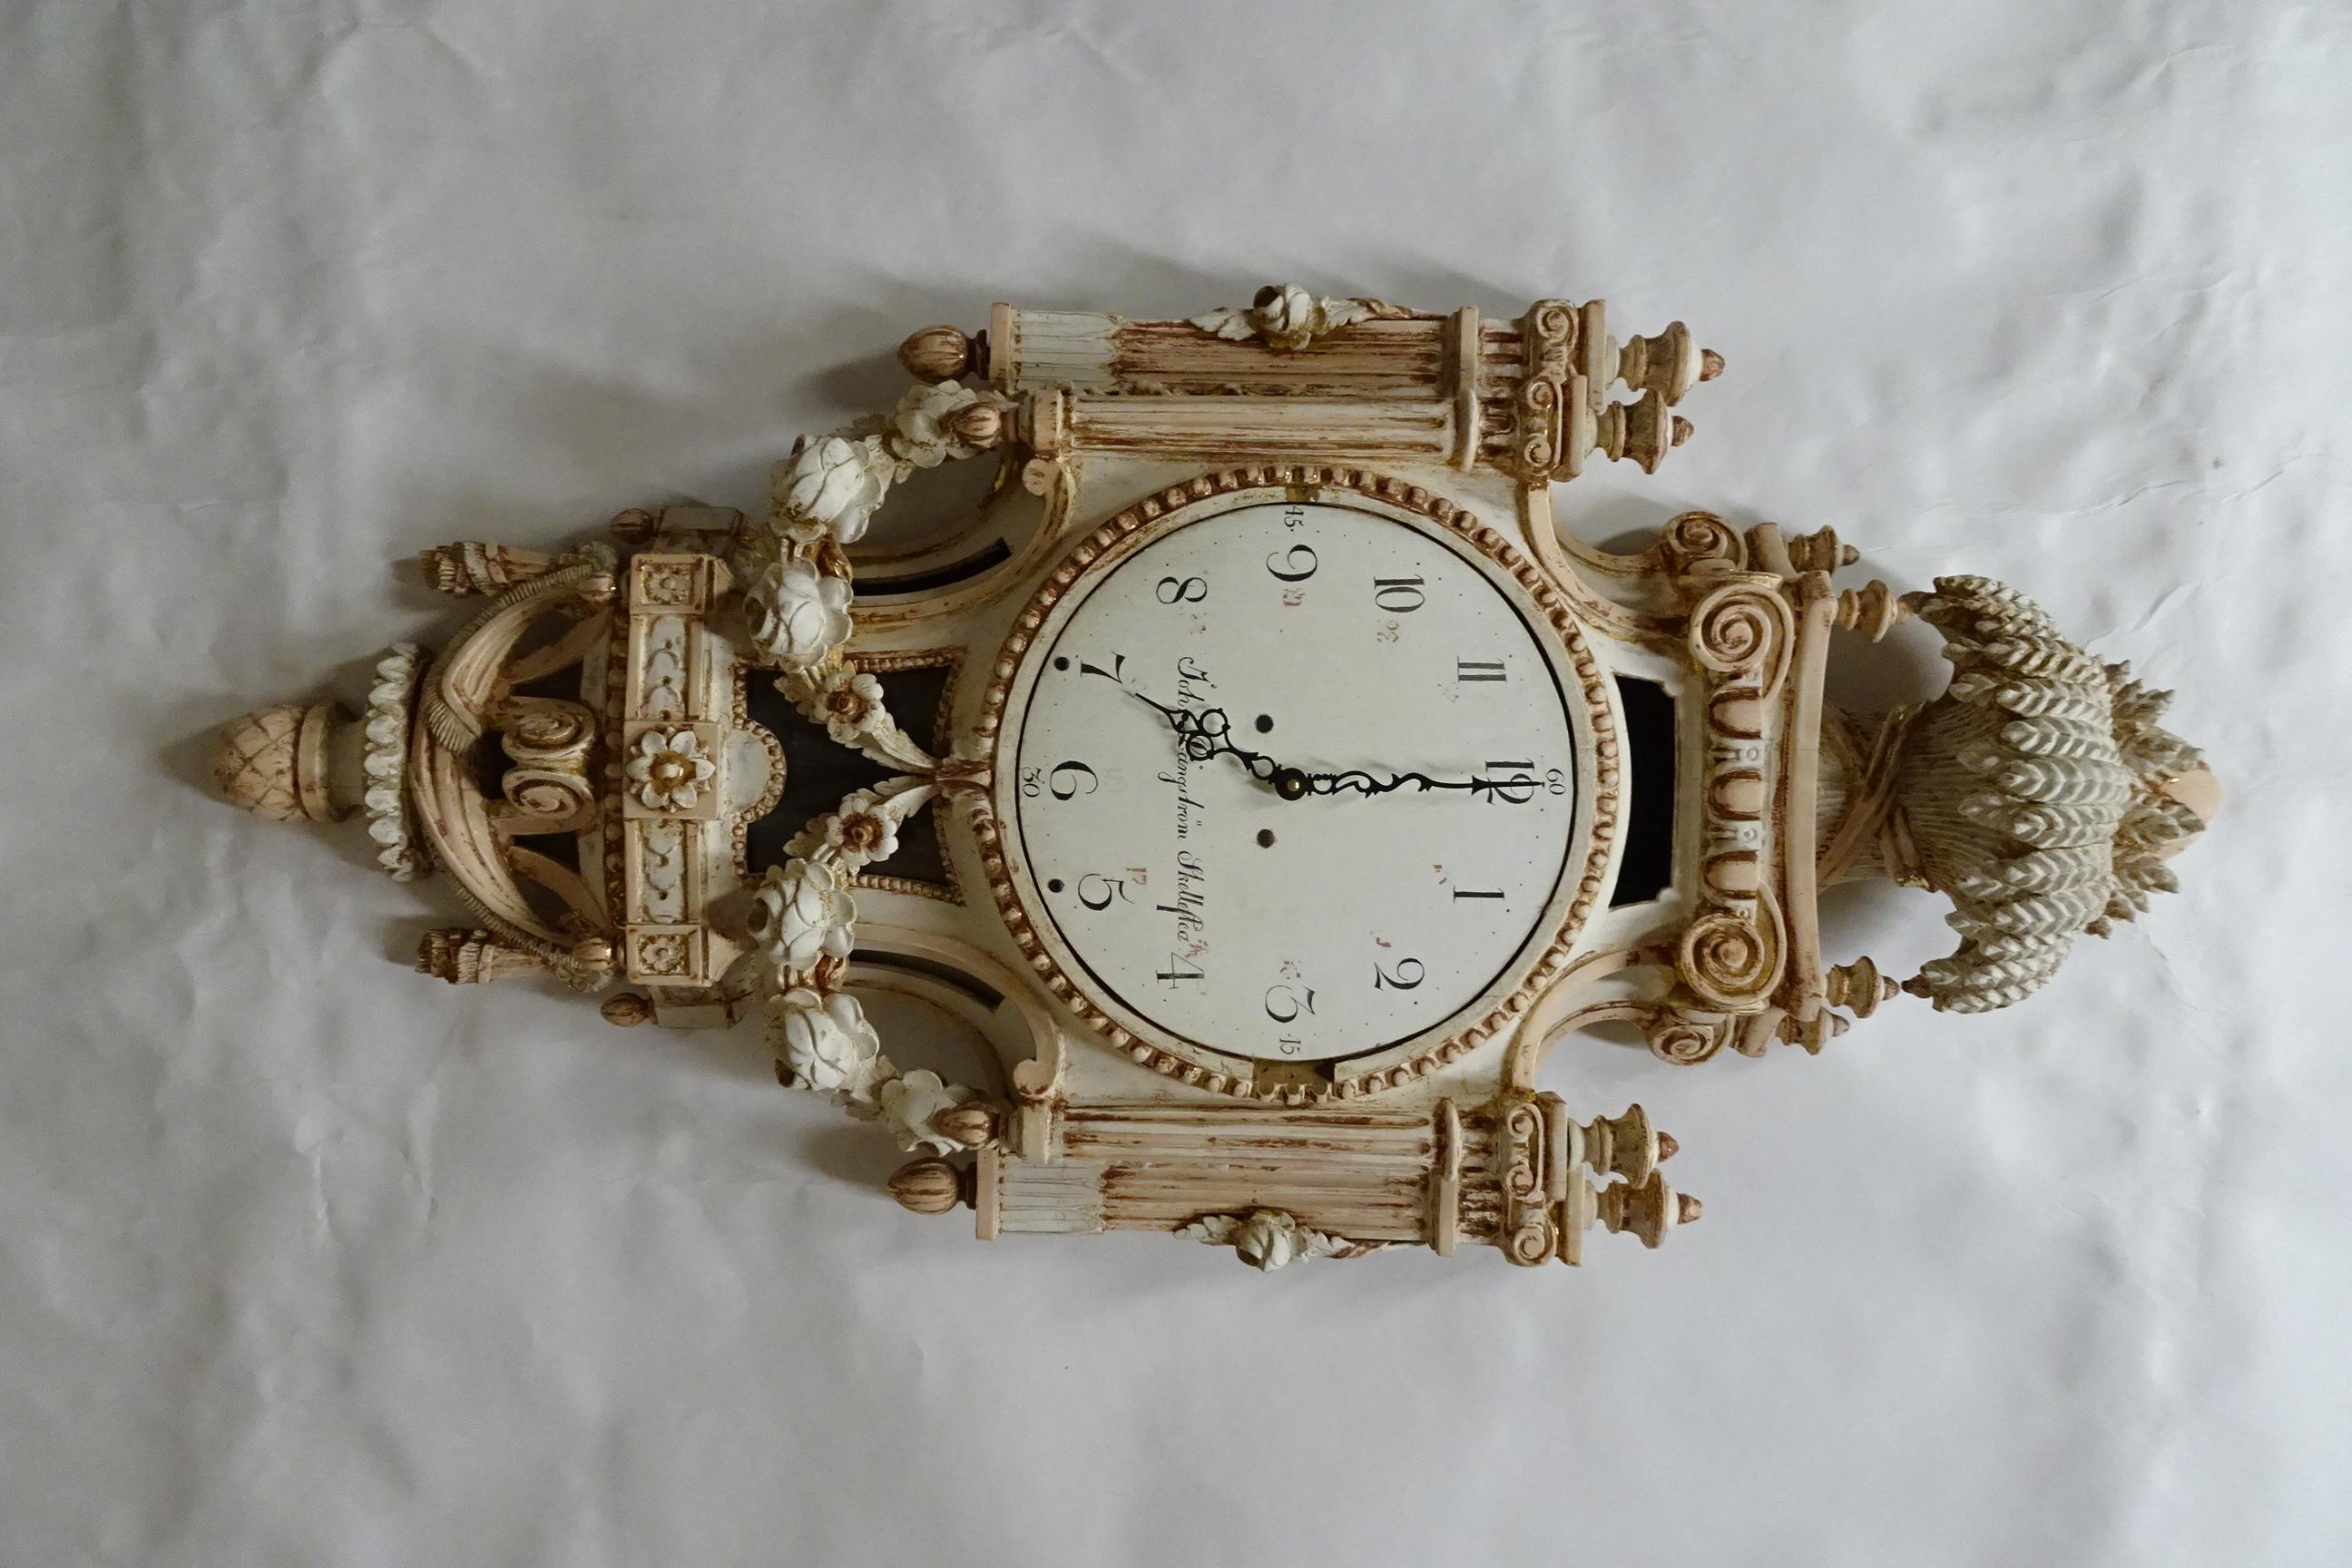 This is a Unique 100% Original Finished Swedish Gustavian Wall Clock.